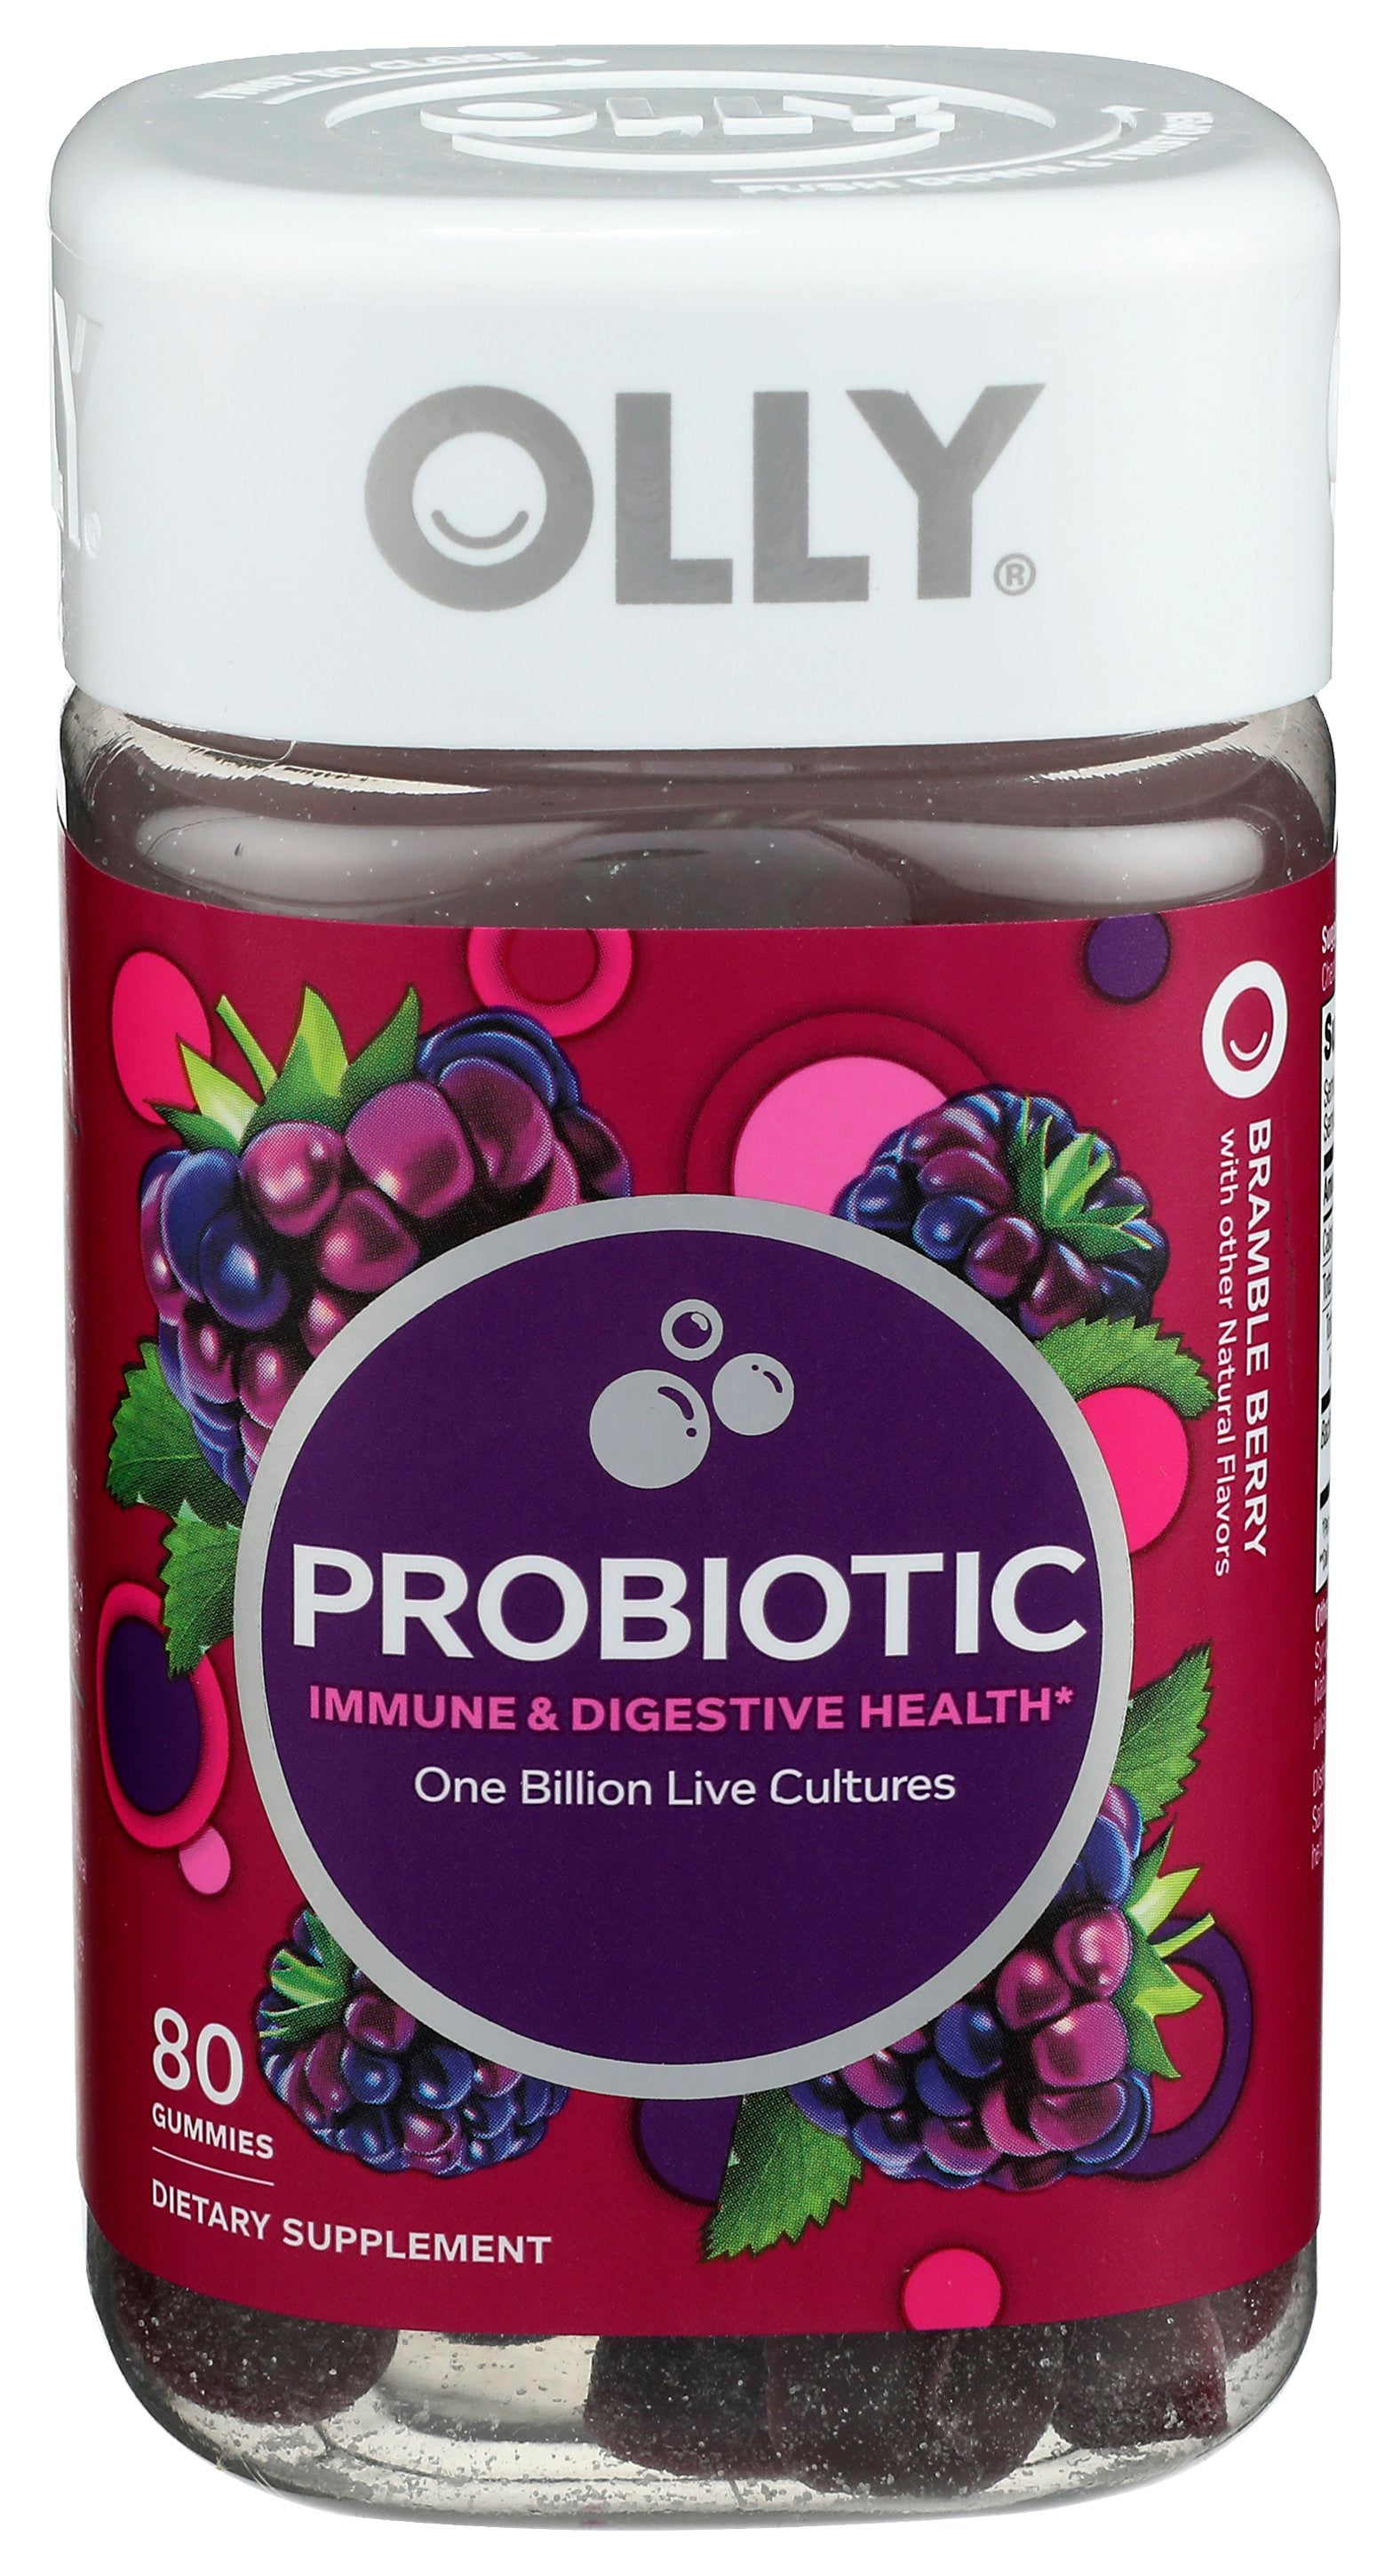 OLLY PROBIOTIC GUMMY BERRY - Case of 3